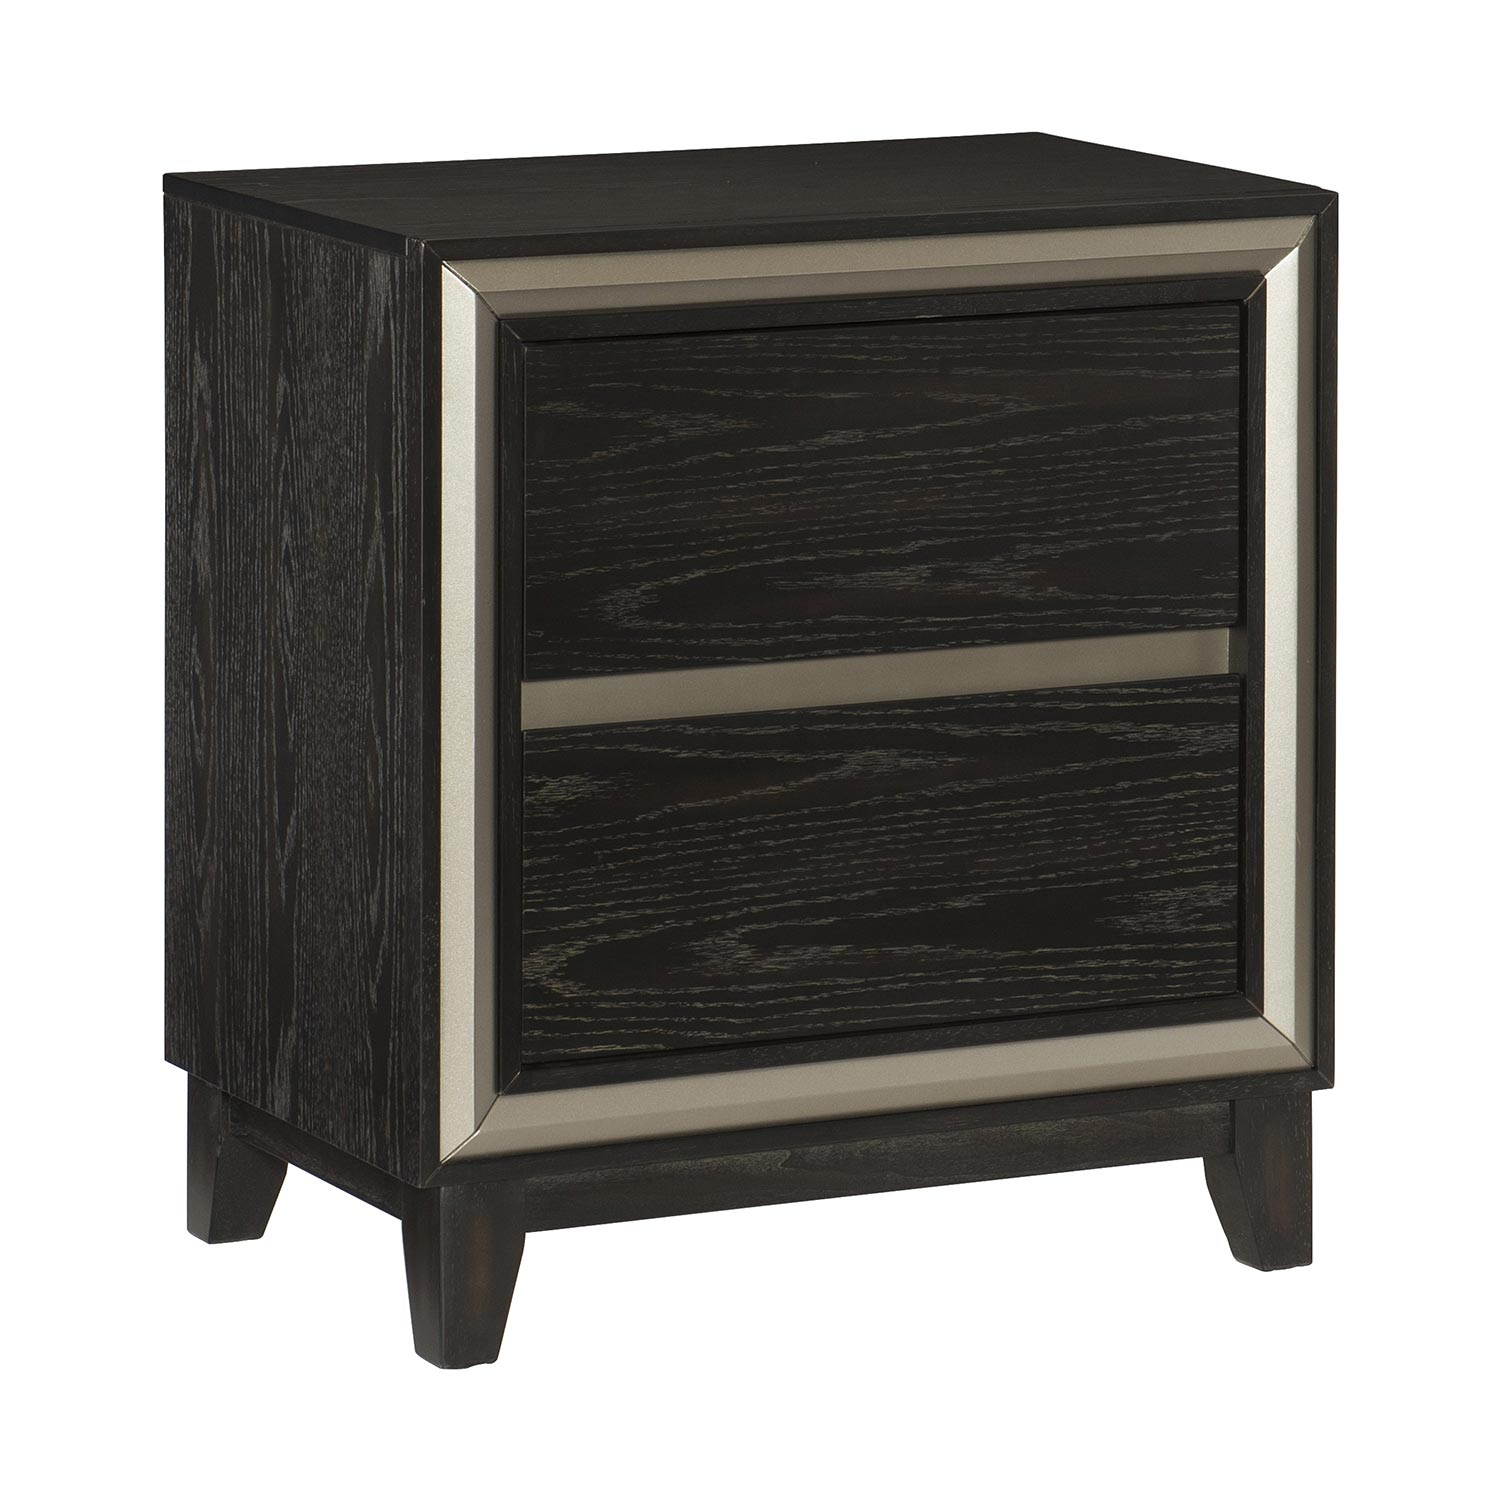 Homelegance Grant Night Stand - Ebony and Silver